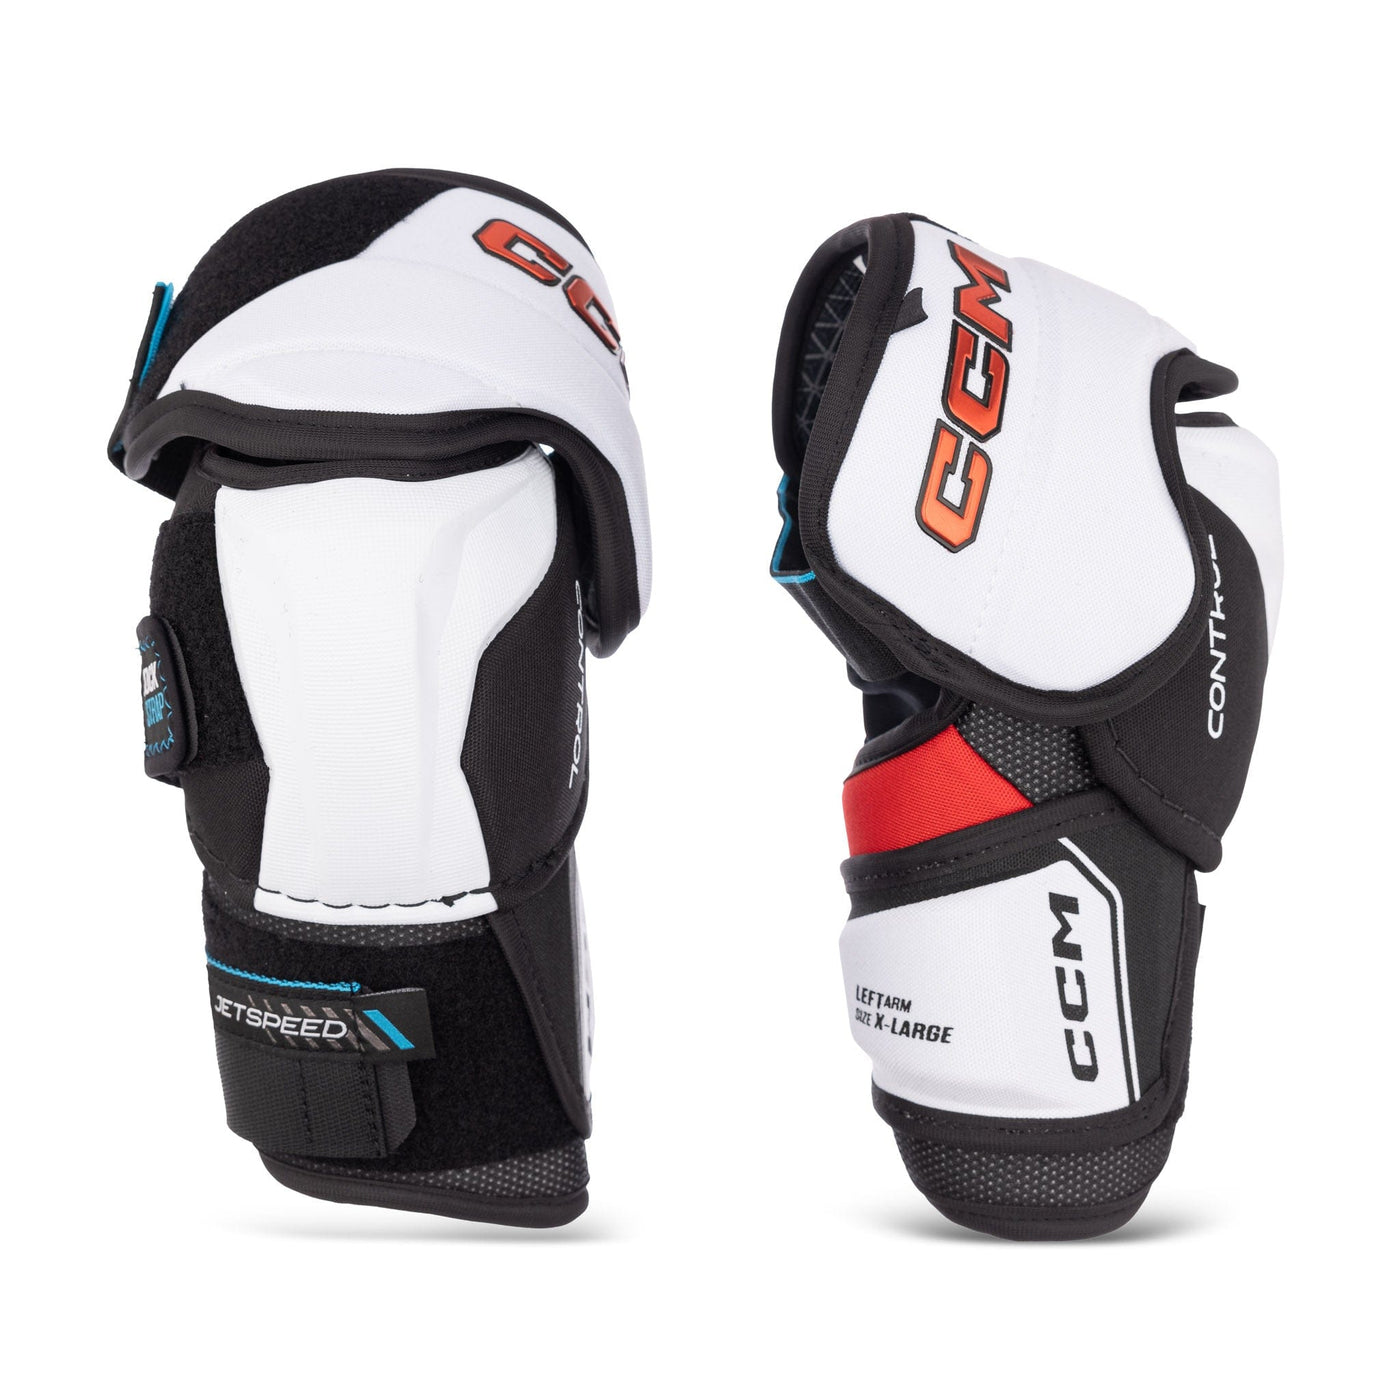 CCM Jetspeed Control Senior Hockey Elbow Pads - The Hockey Shop Source For Sports